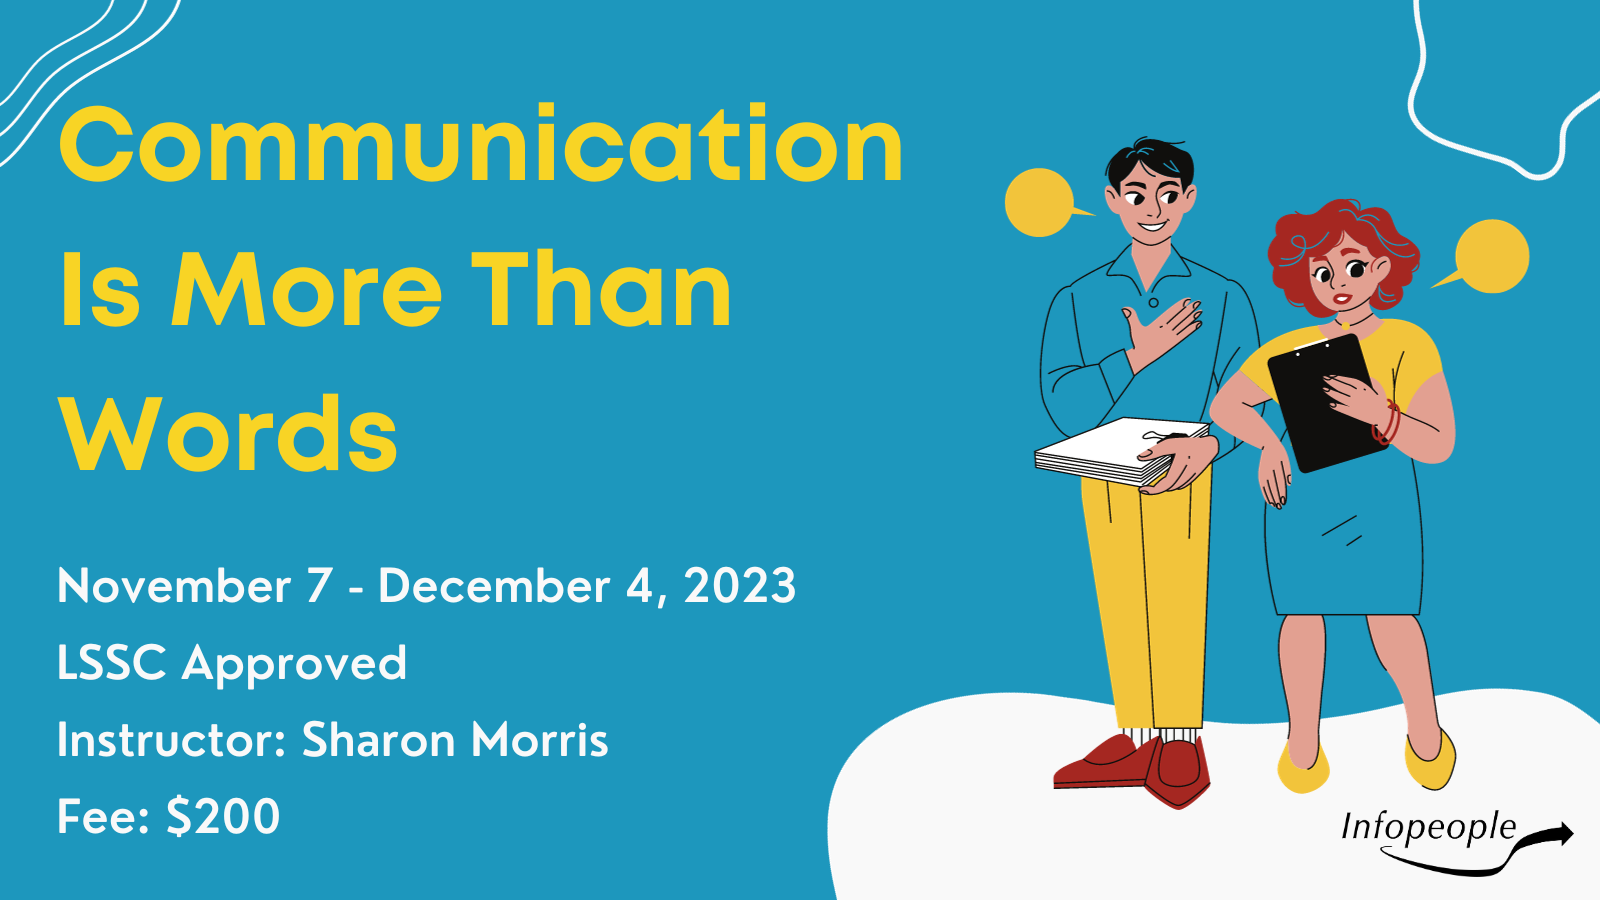 Communication is more than words - an infopeople course. November 7 to December 4, 2023. LSSC approved. Instructor: Sharon Morris. Fee: $200. A man and a woman holding office supplies interact with speech bubbles.